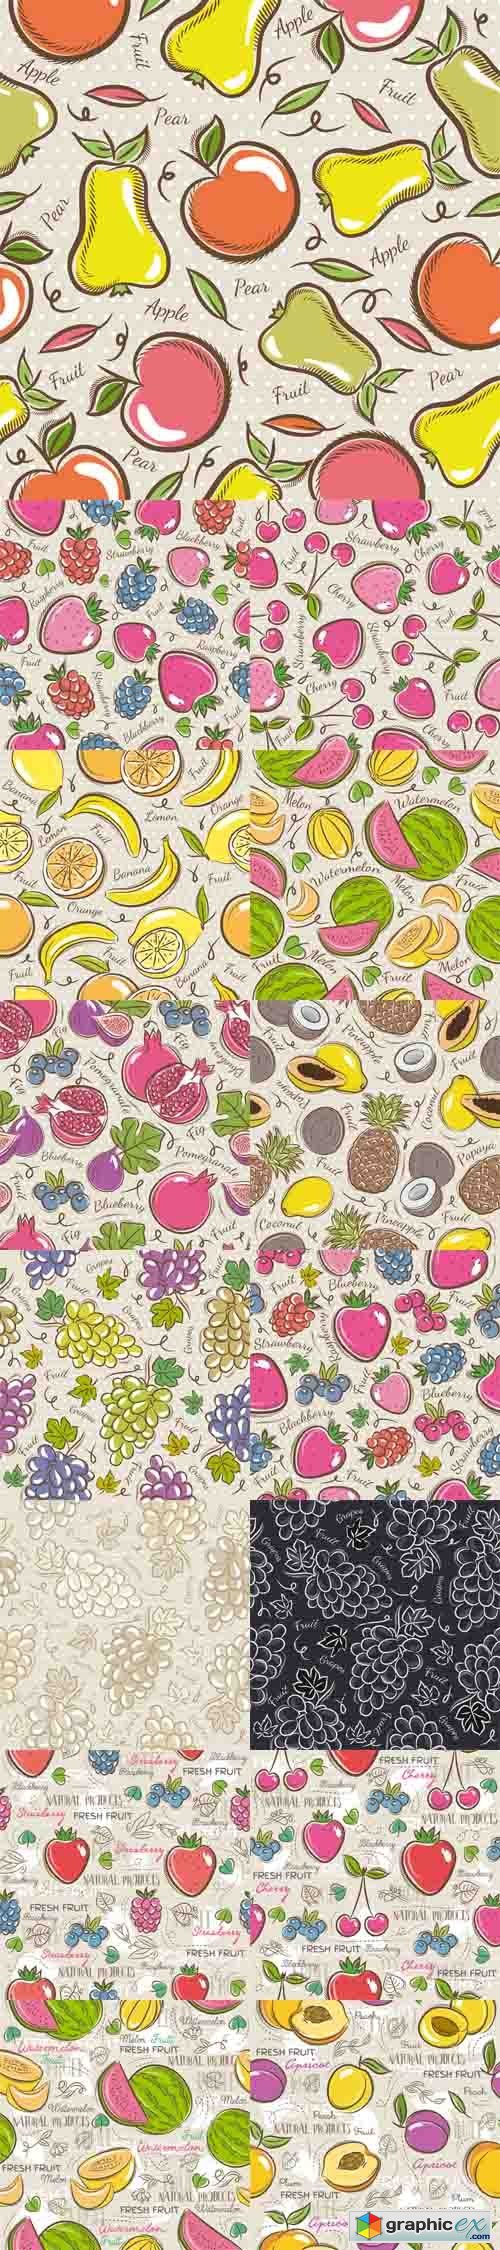 Seamless Patterns with Fruits